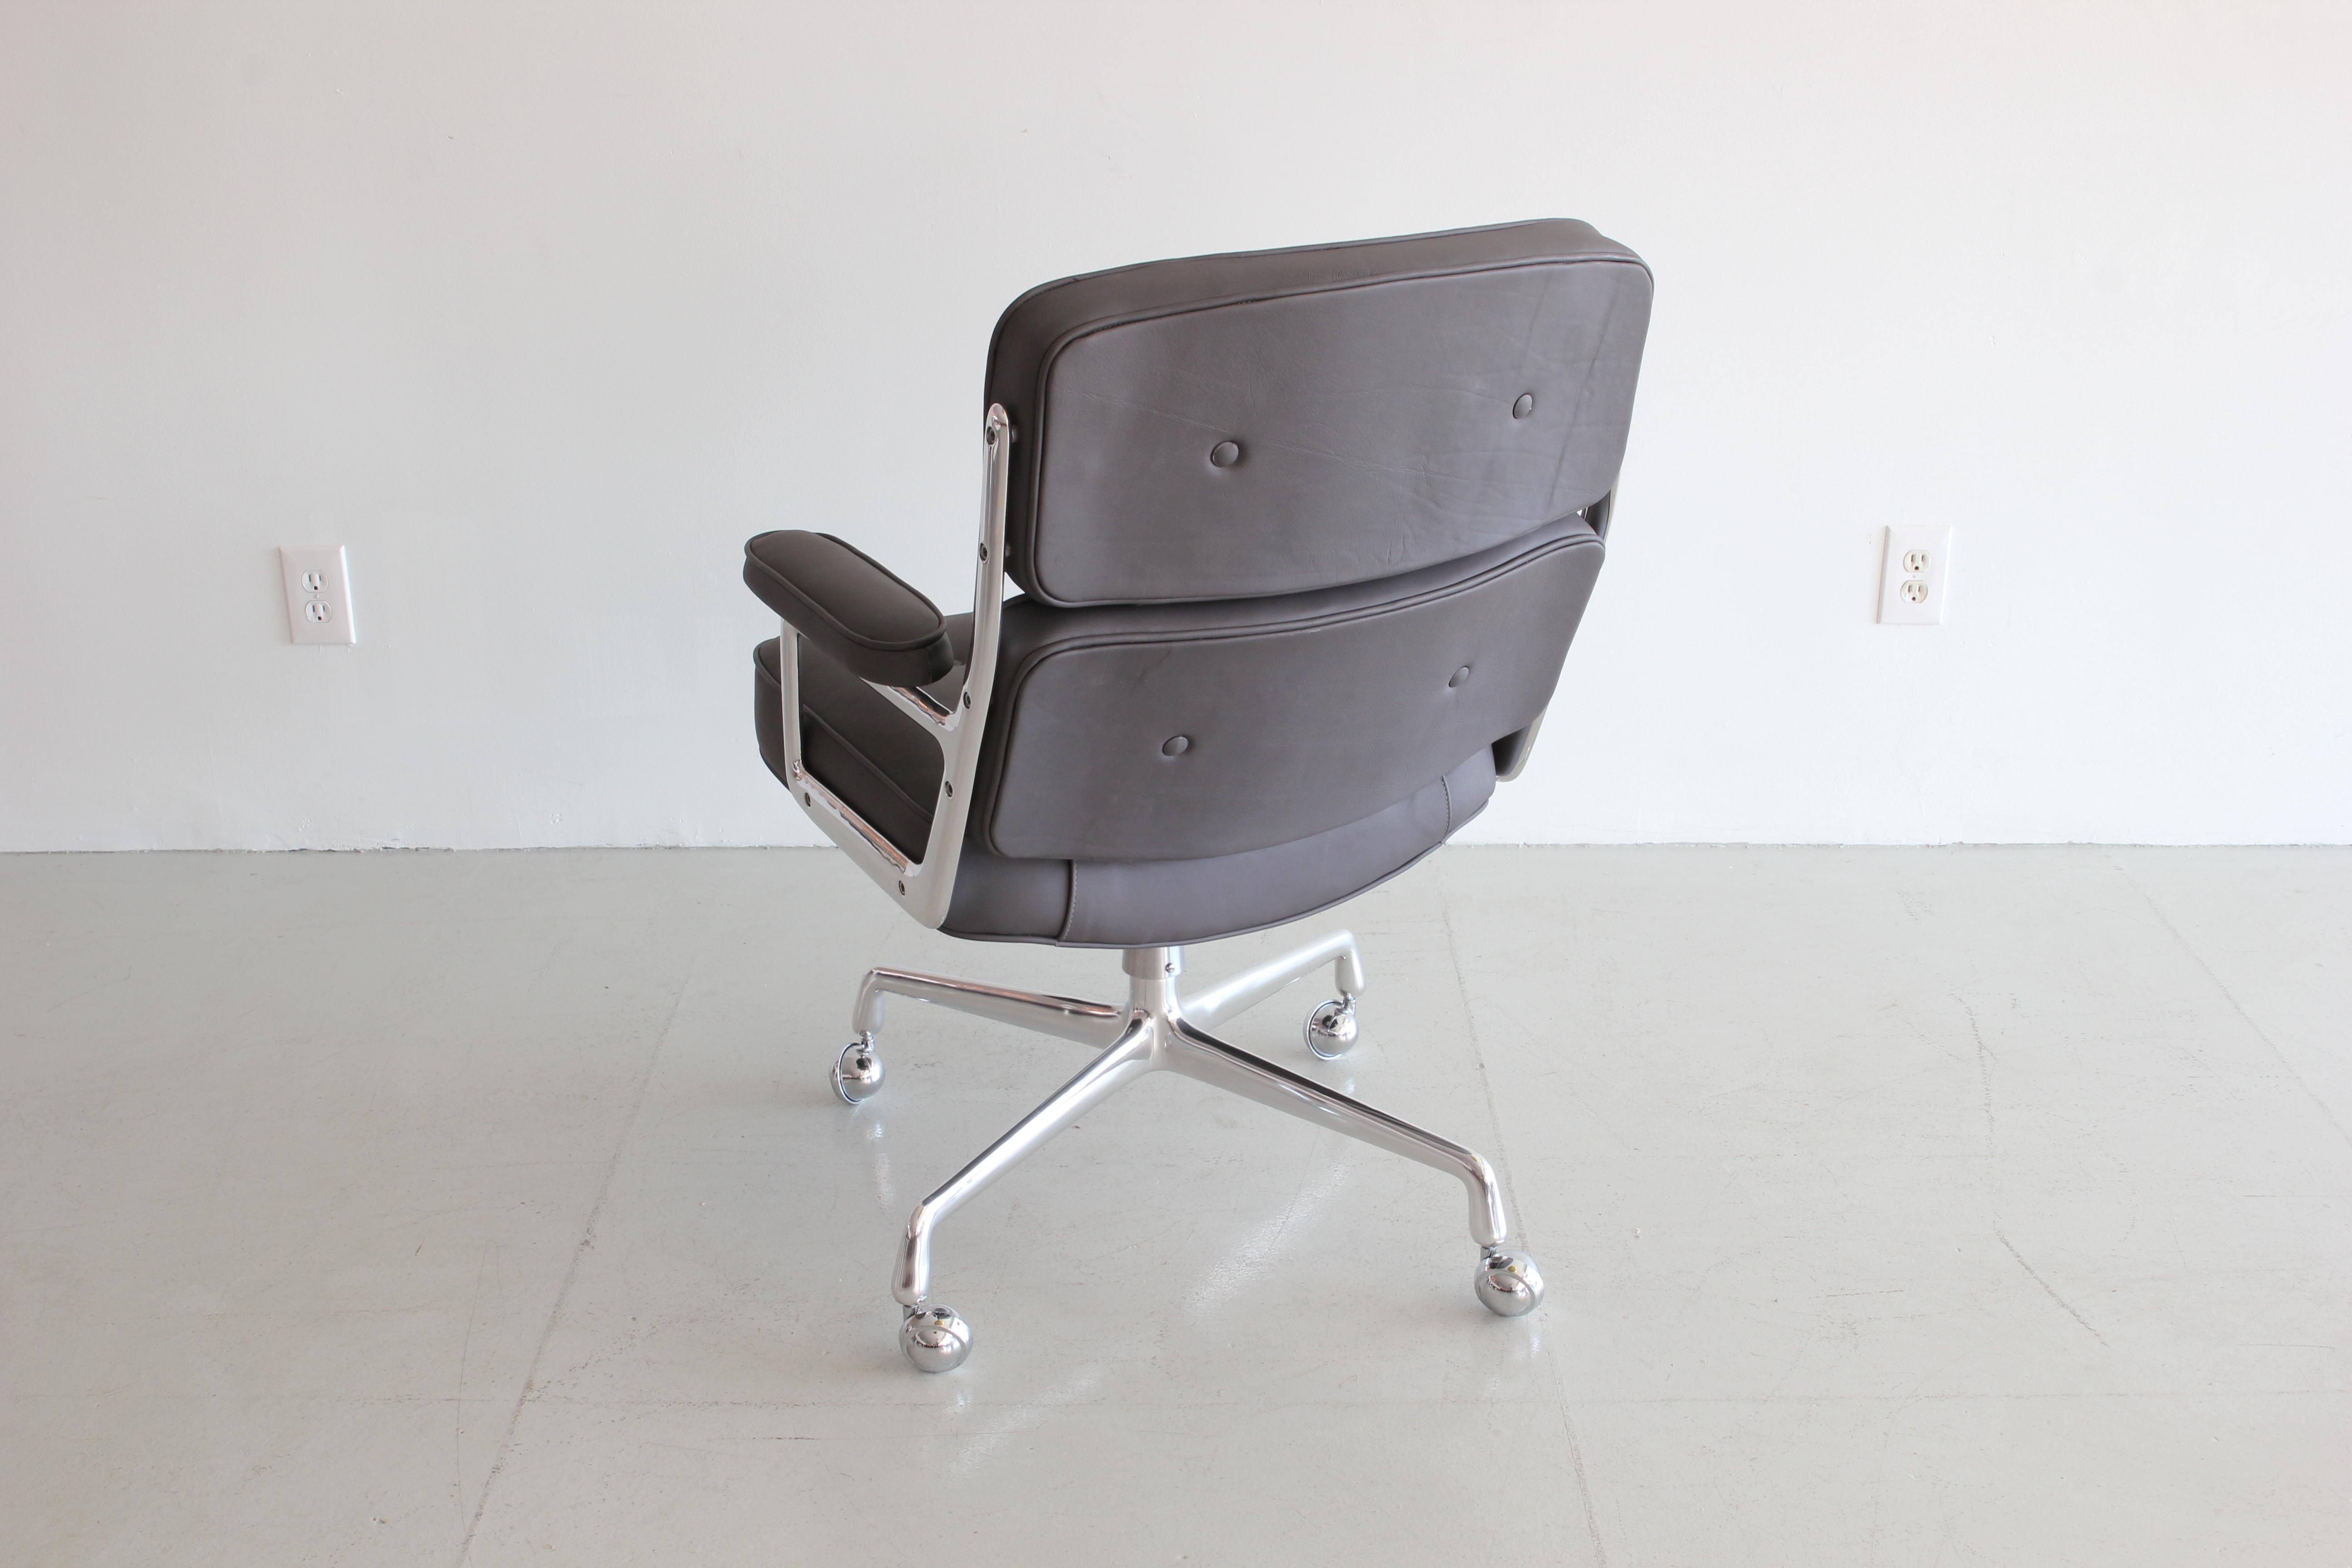 Classic office chair from the Time Life building in New York. Designed by Eames featuring newly upholstered in grey leather, new casters and a newly polished aluminum base and frame. Chair is height adjustable with tilt and swivel.